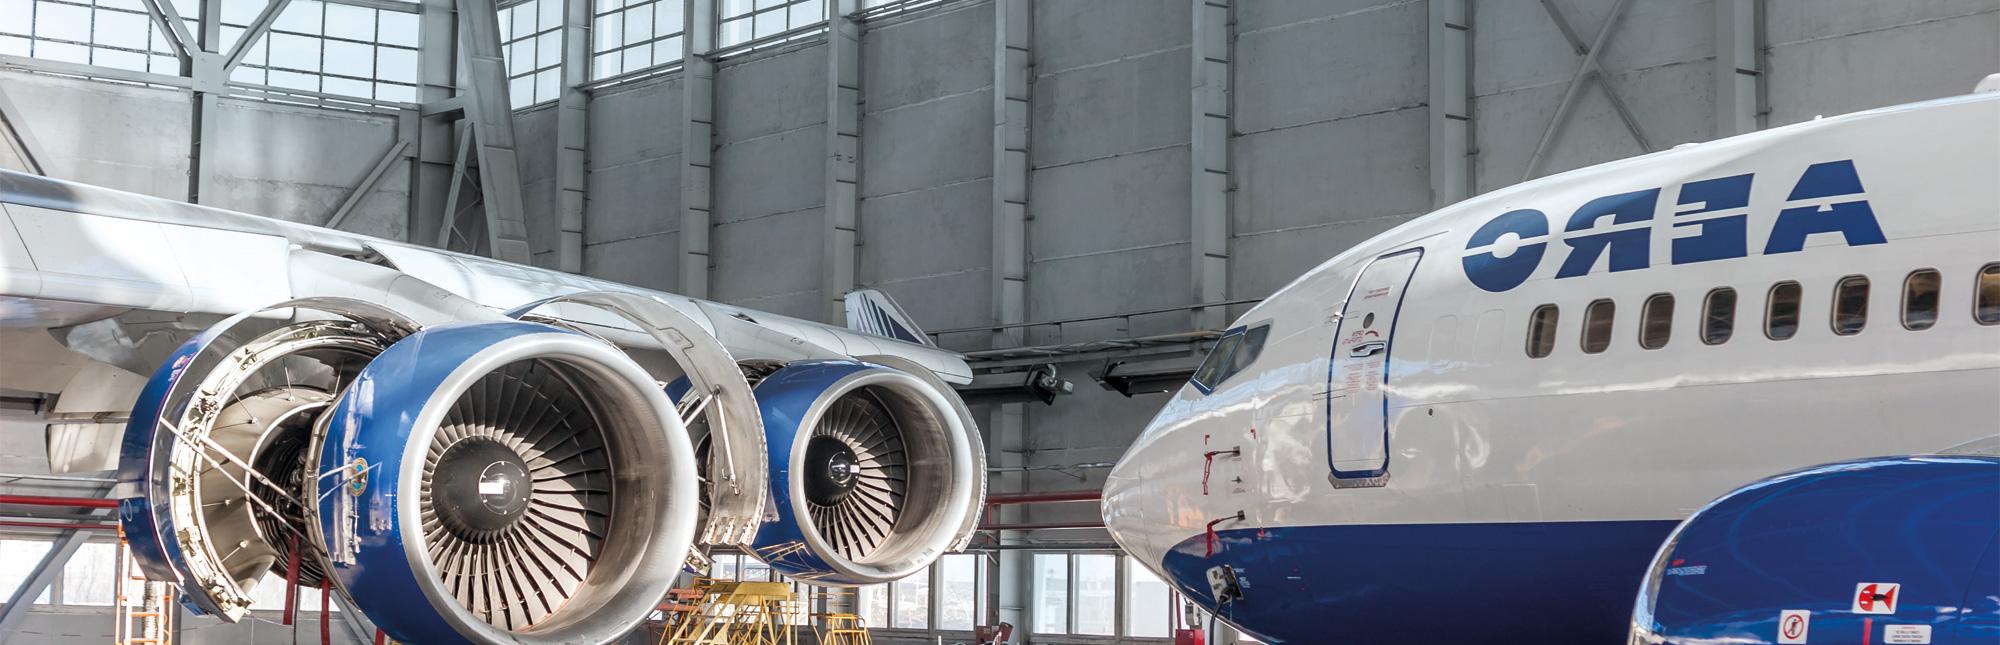 Cleaning solutions for the aerospace industry